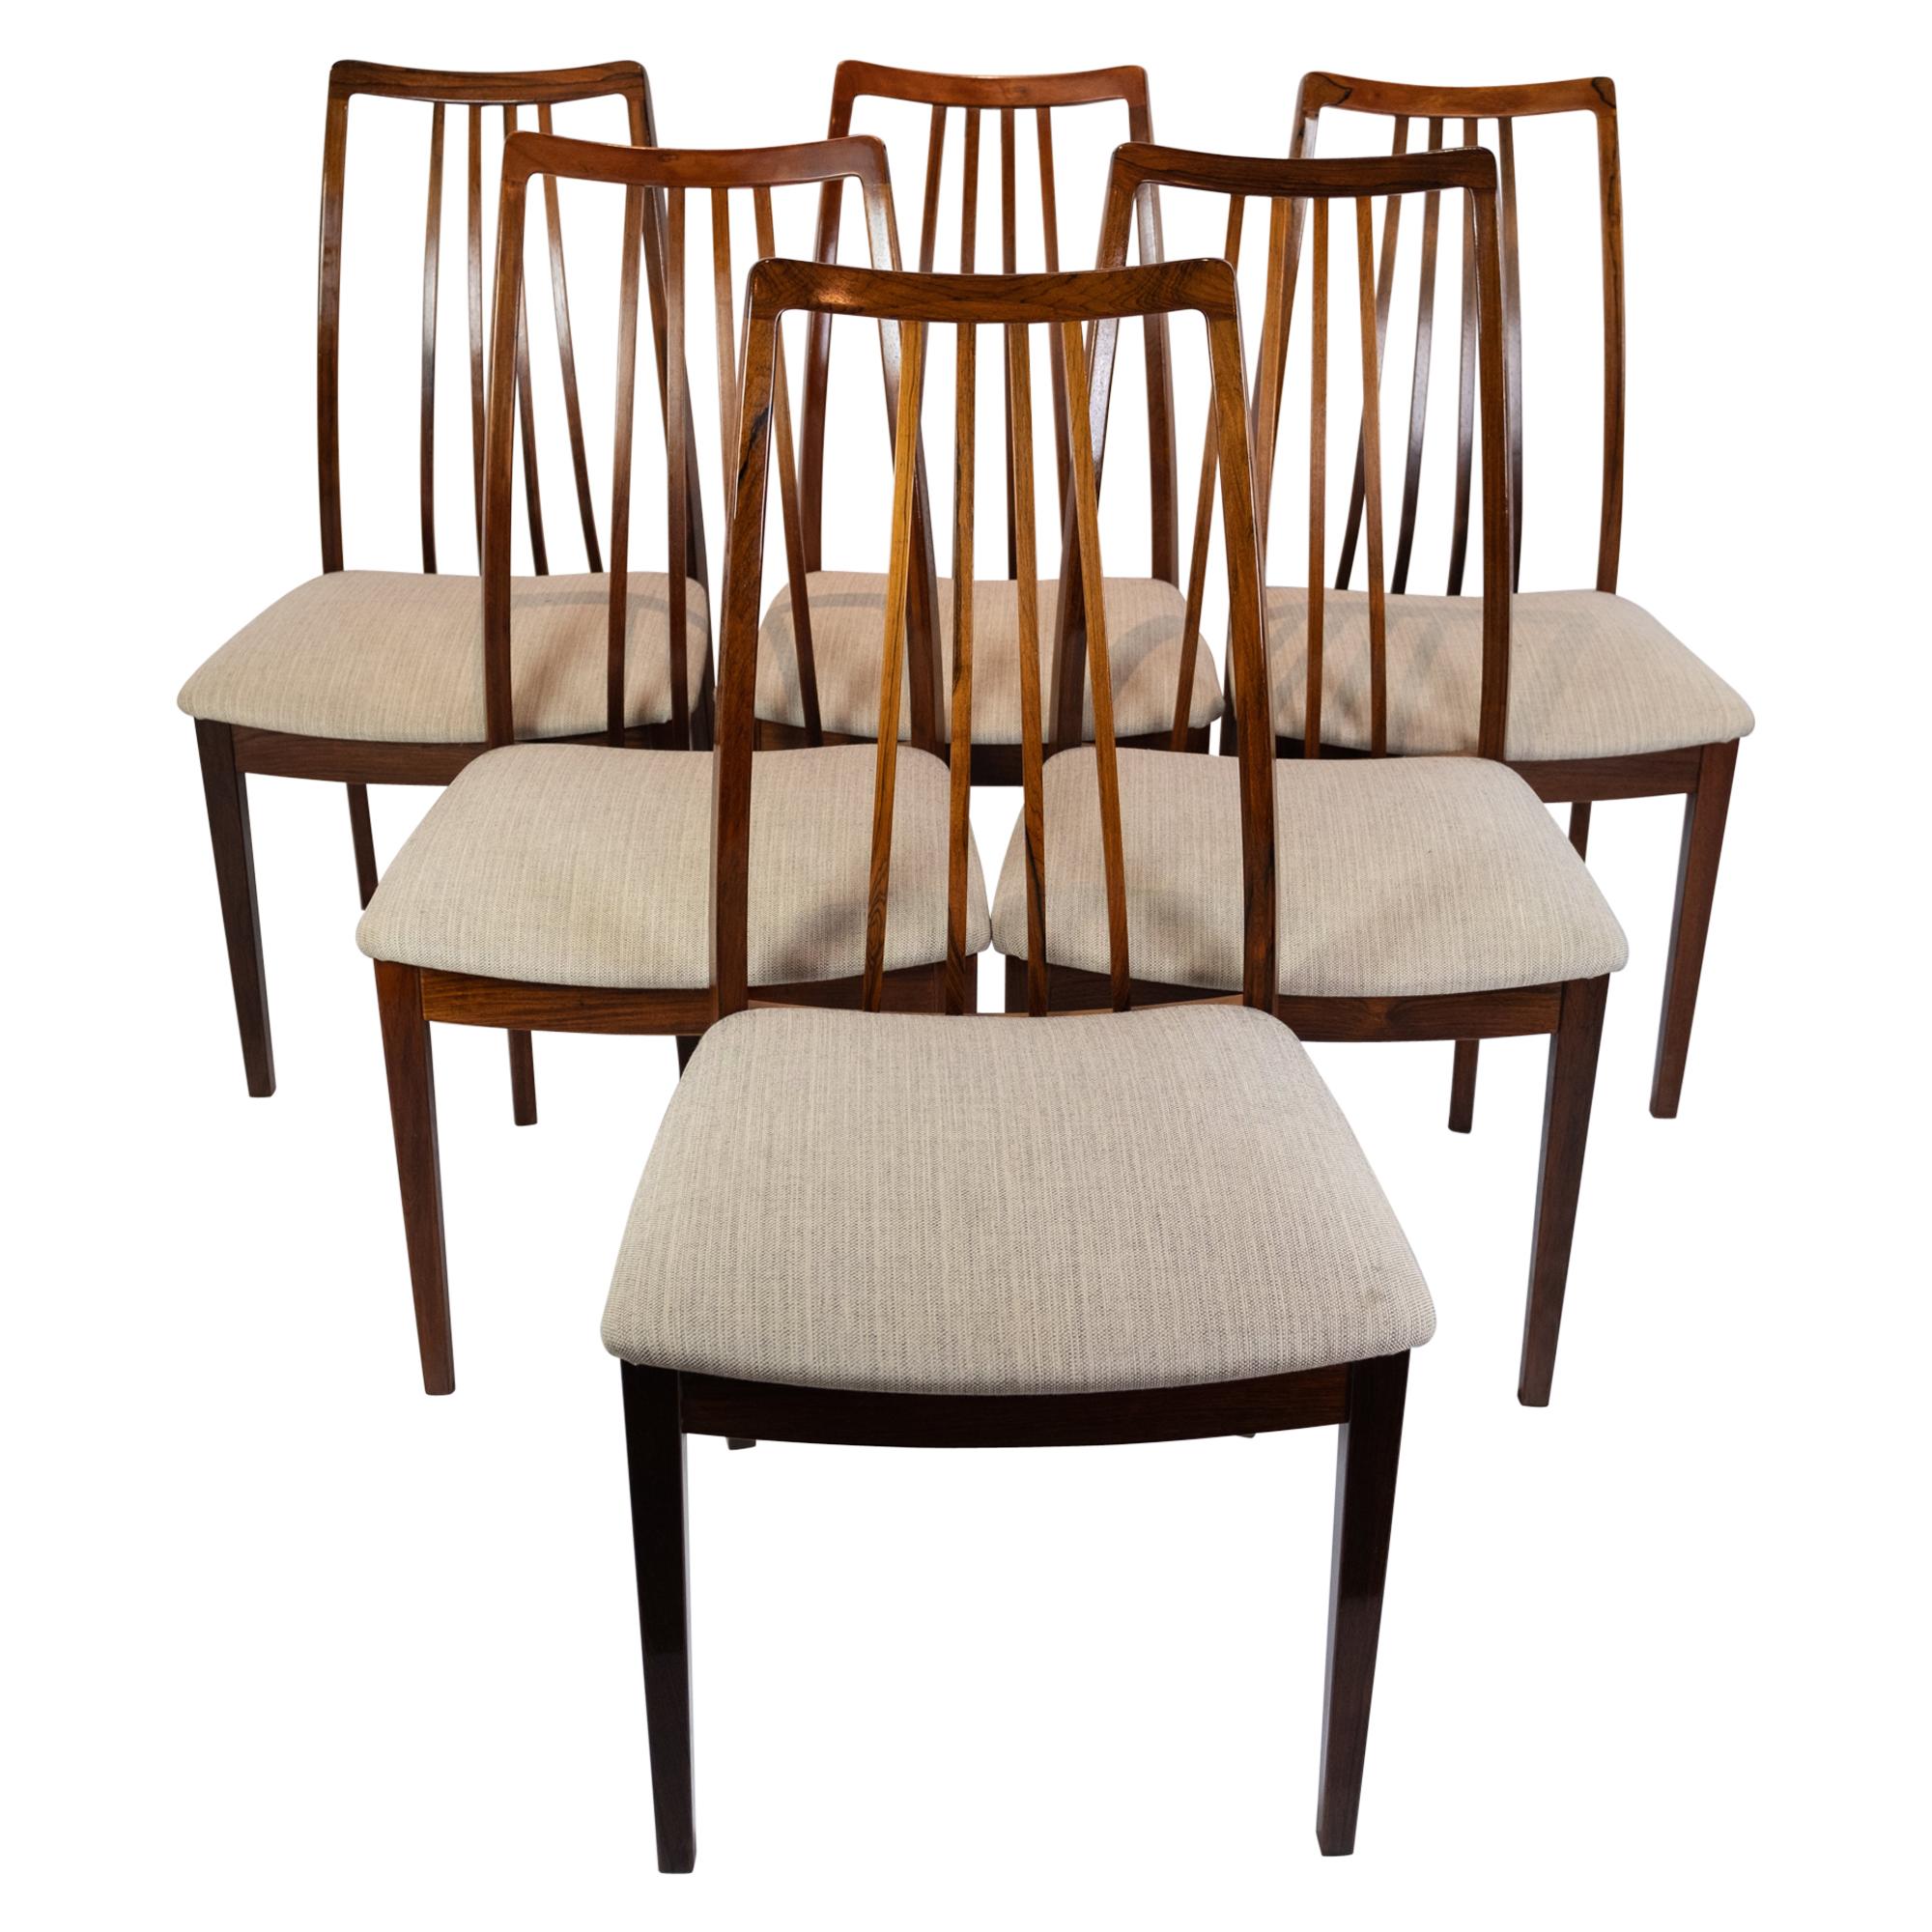 Set of Six Dining Room Chairs of Rosewood of Danish Design, 1960s For Sale